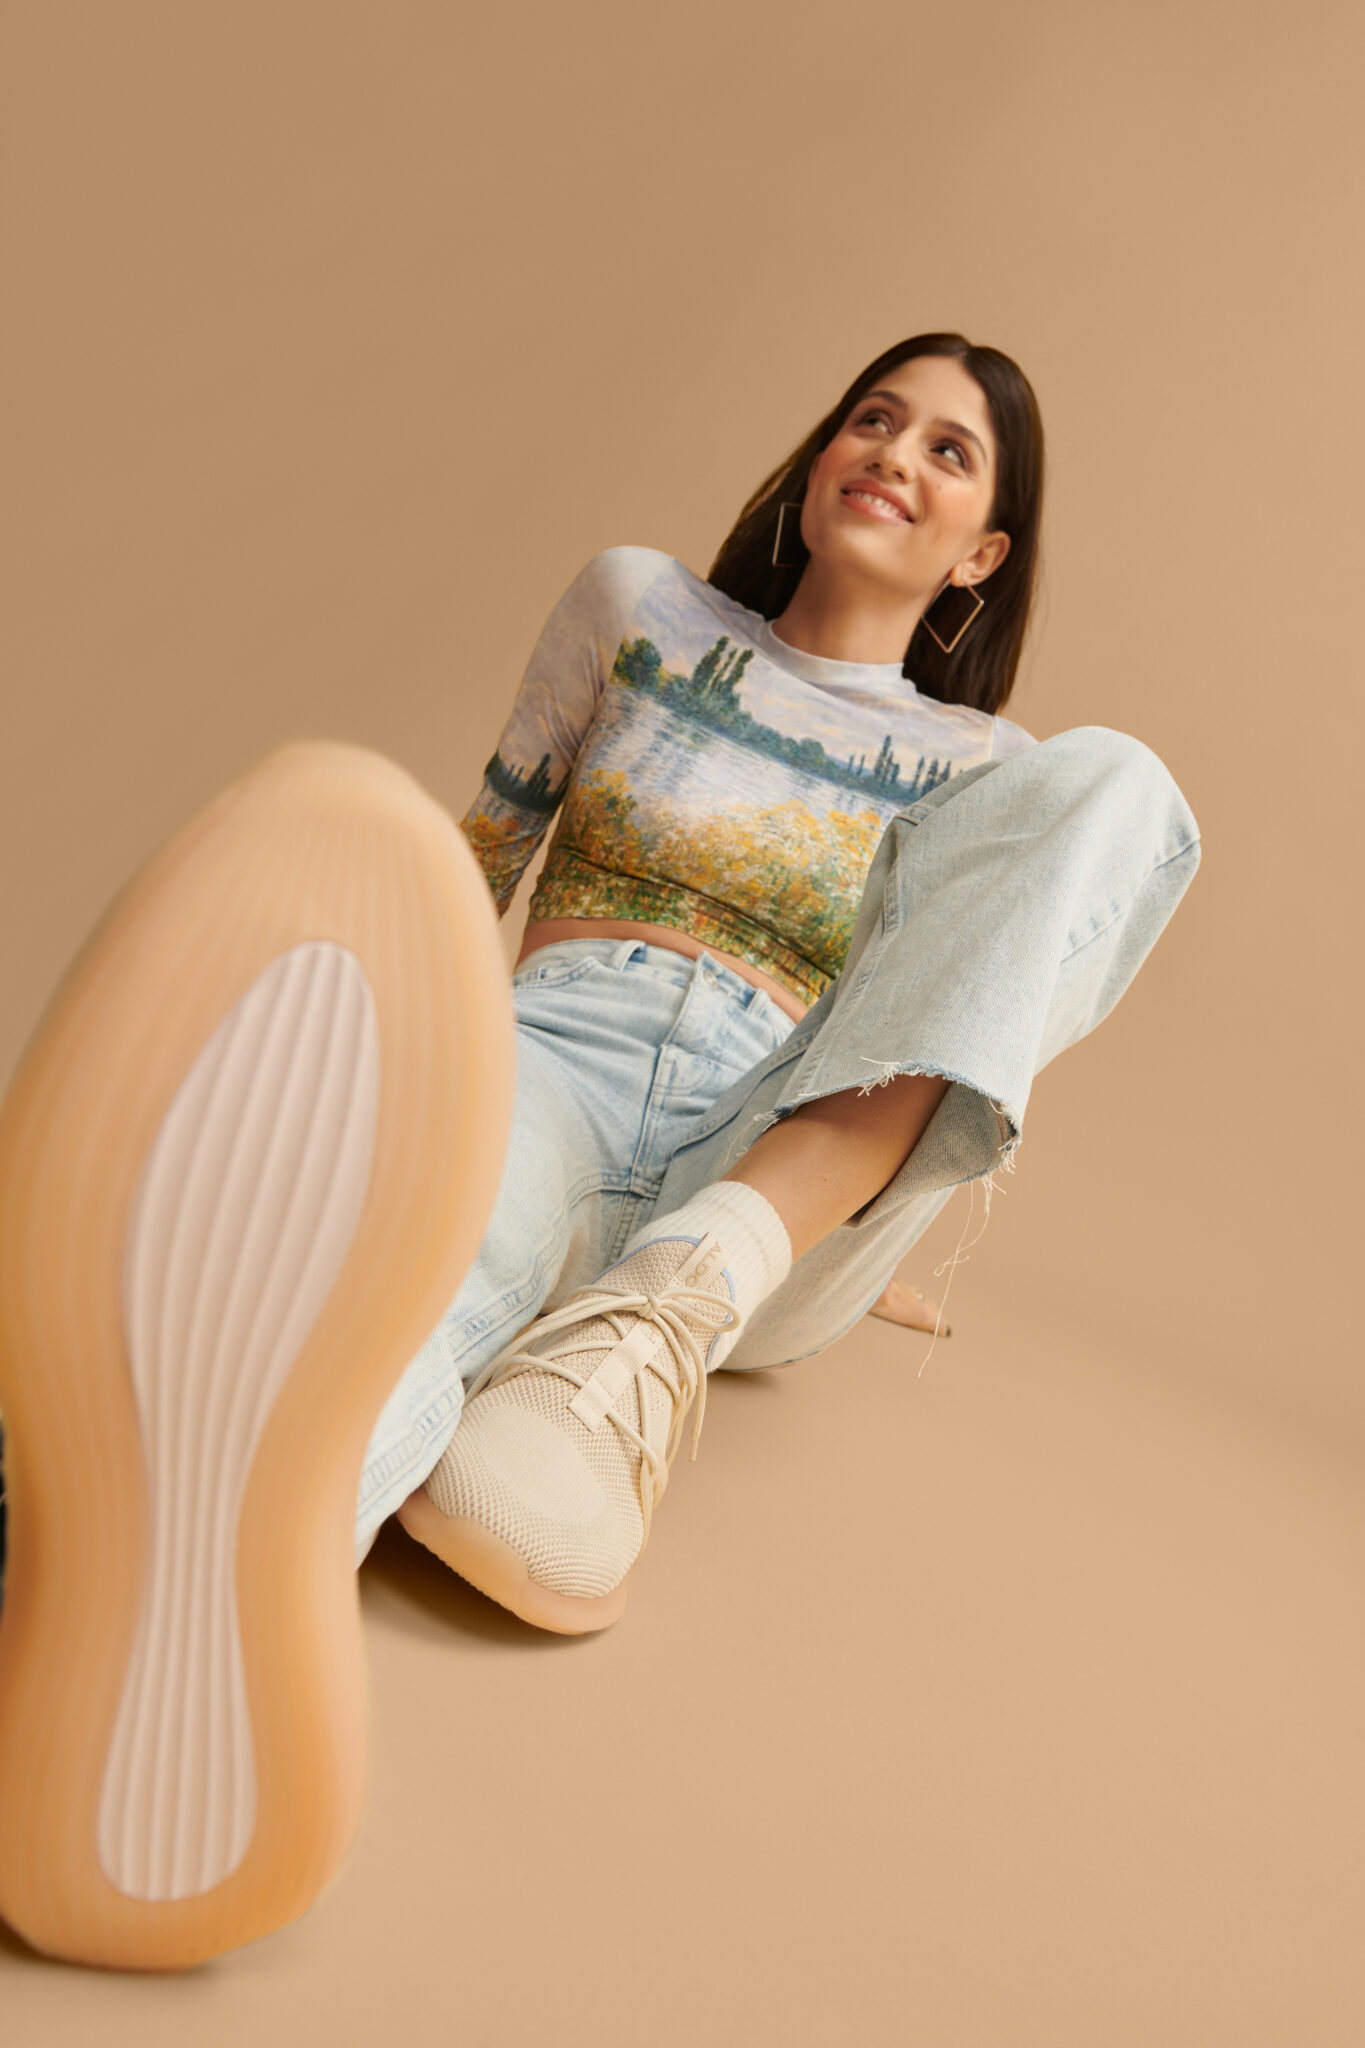 ALDO launches second sustainable-focused collection